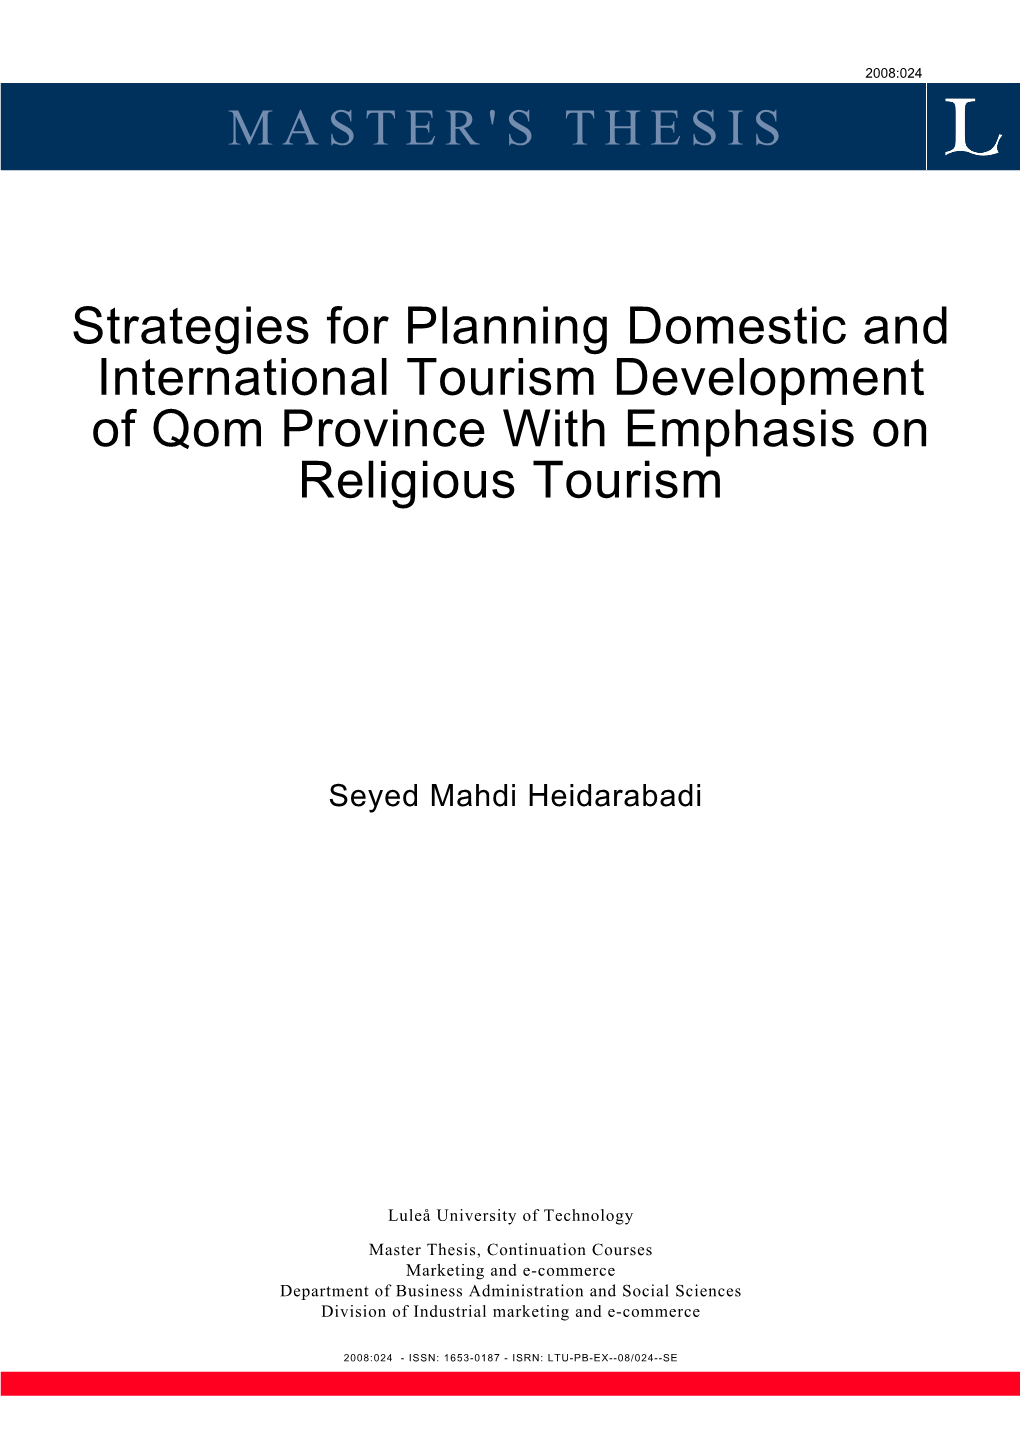 MASTER's THESIS Strategies for Planning Domestic And